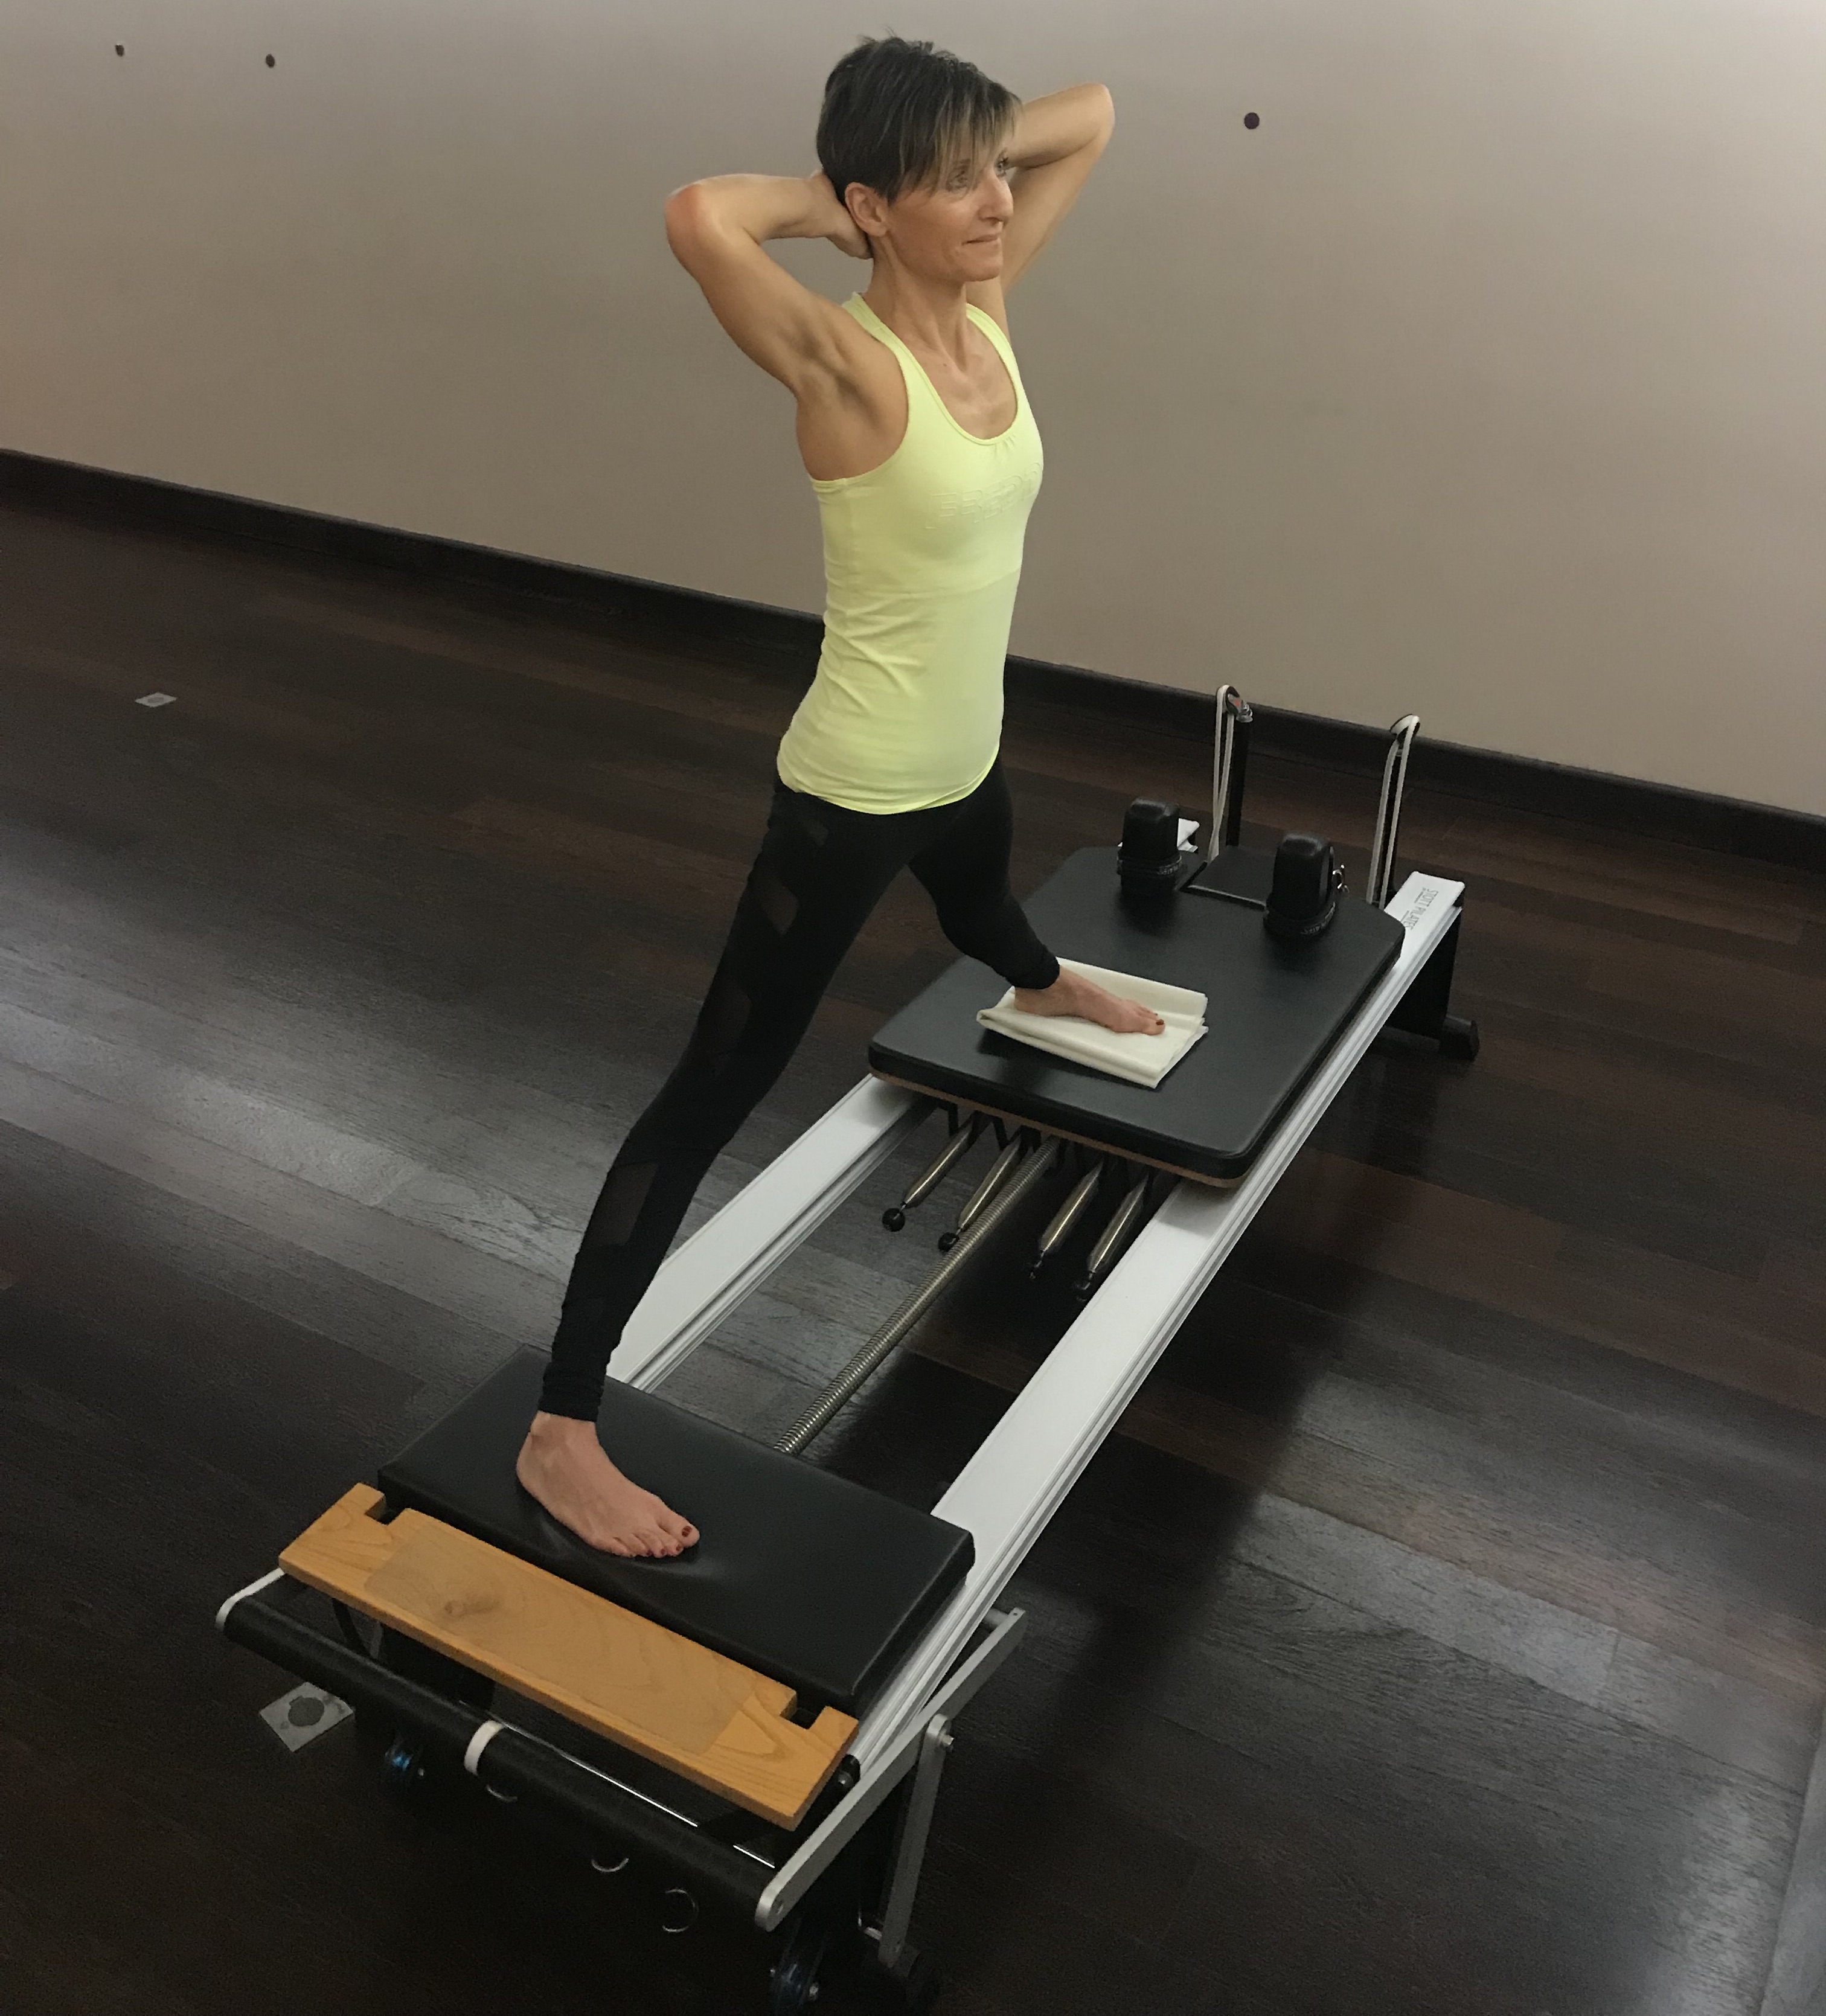 You are currently viewing Introductory offer: Full private Pilates Reformer Classes for only 70€ – try free!